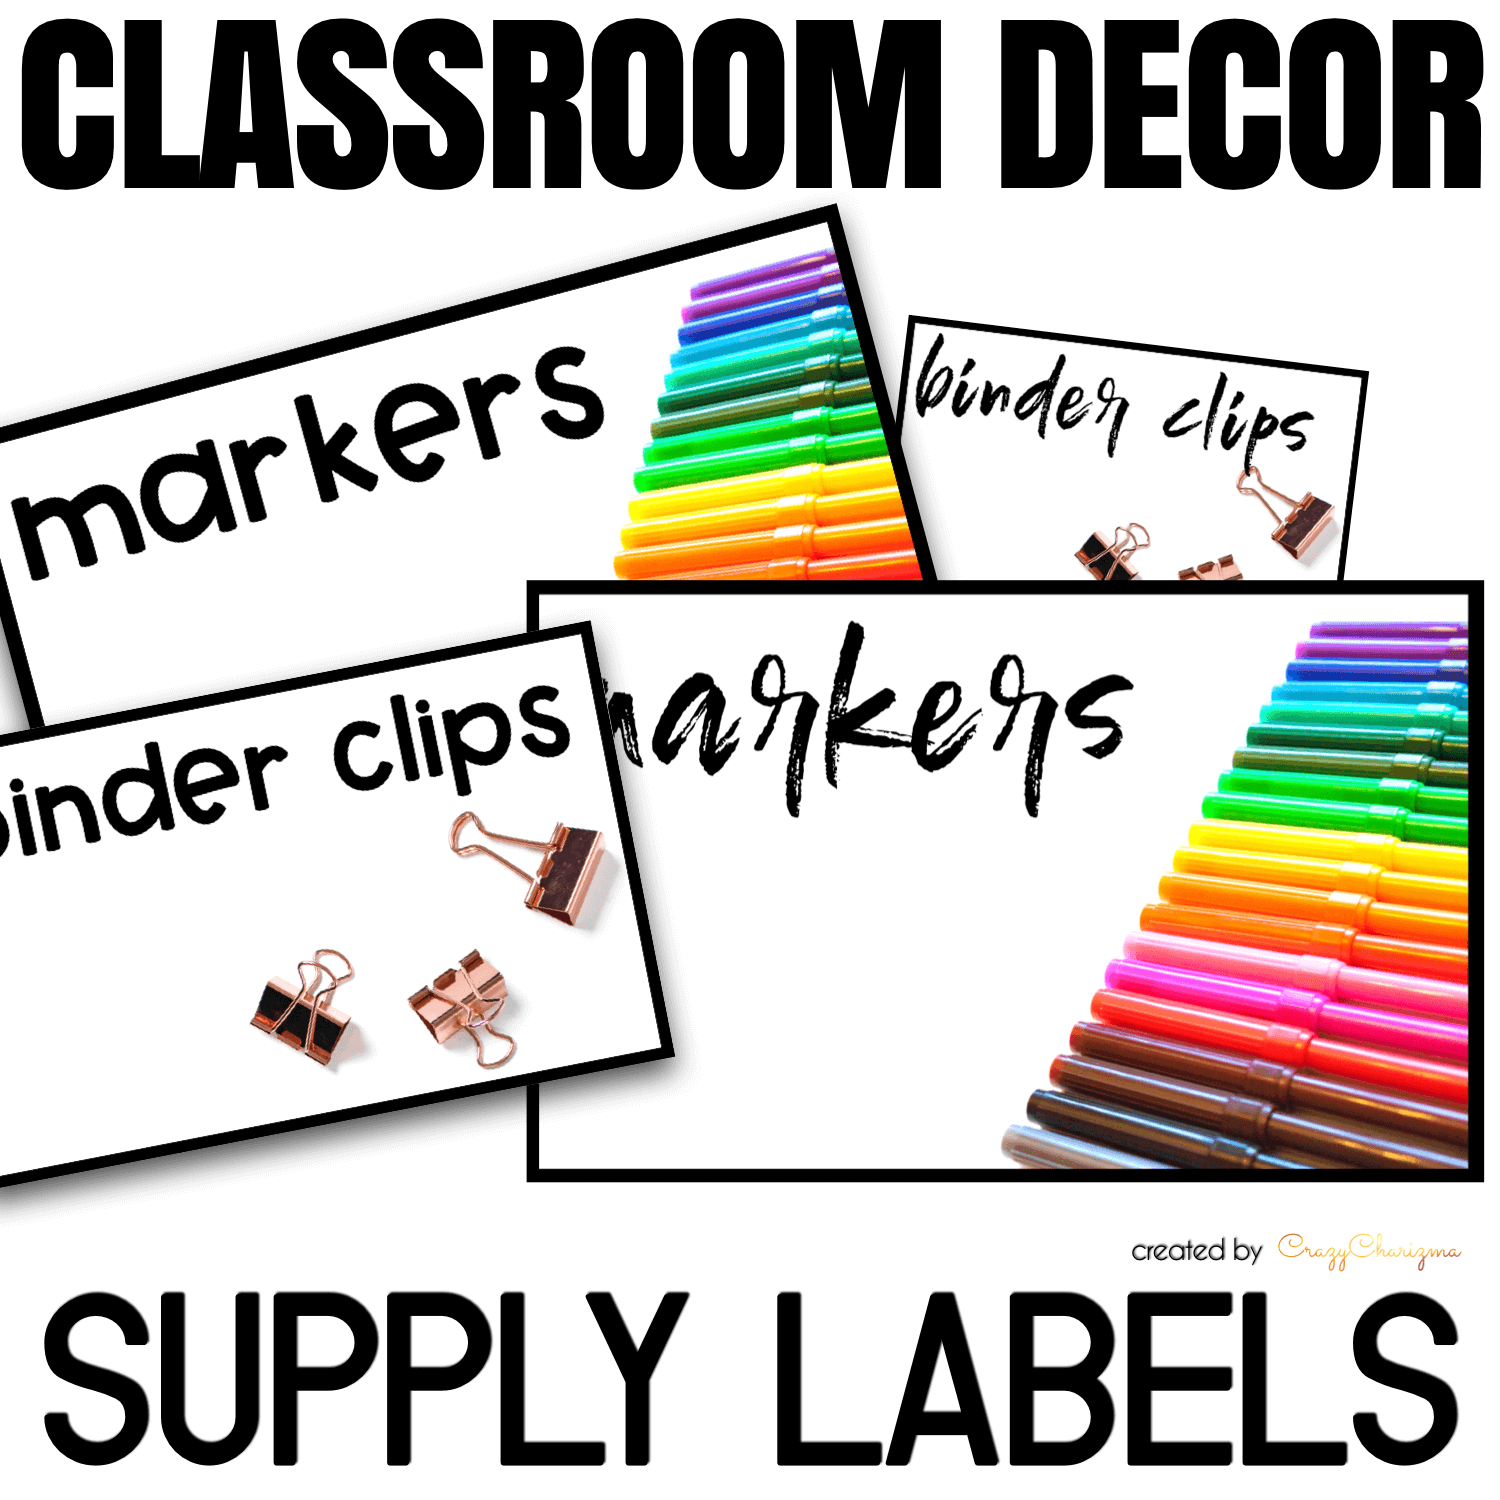 Looking to brighten up your classroom this year? This set will add some fresh and clean style to your classroom. Included in this resource are 40 pre-made school supply labels in 2 styles! They are perfect to incorporate into your classroom.